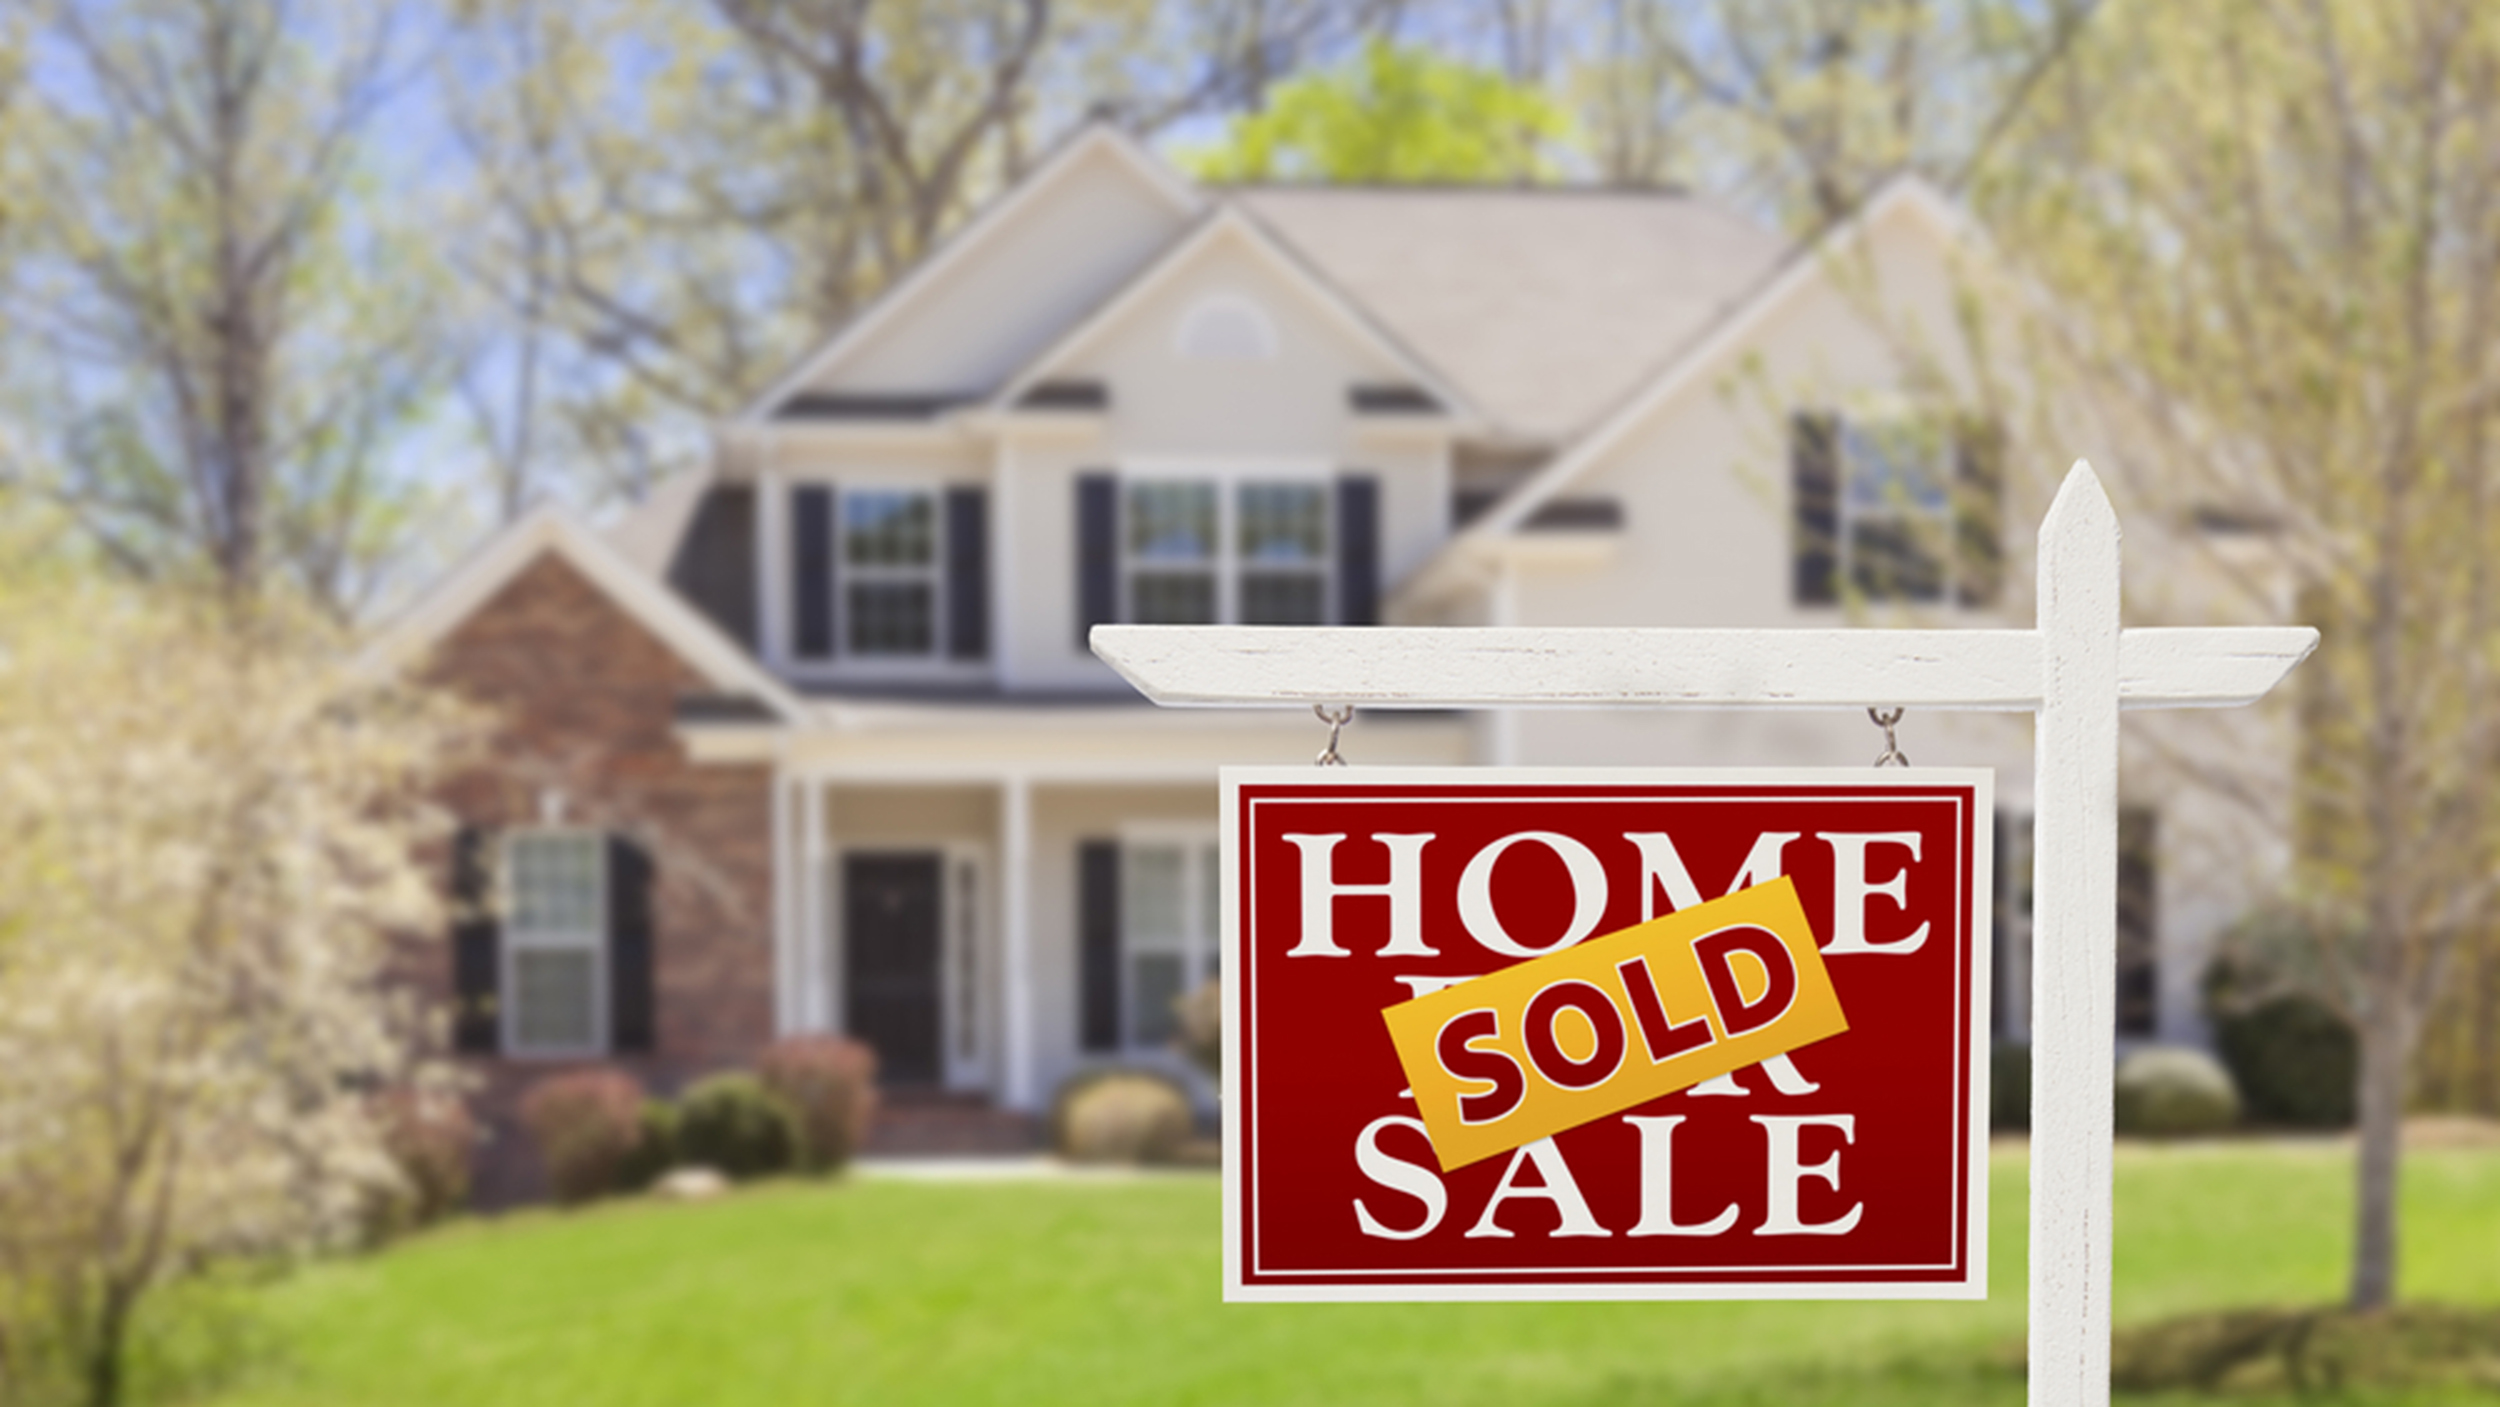 HOW TO MAKE HOUSE SELLING HASSLE-FREE